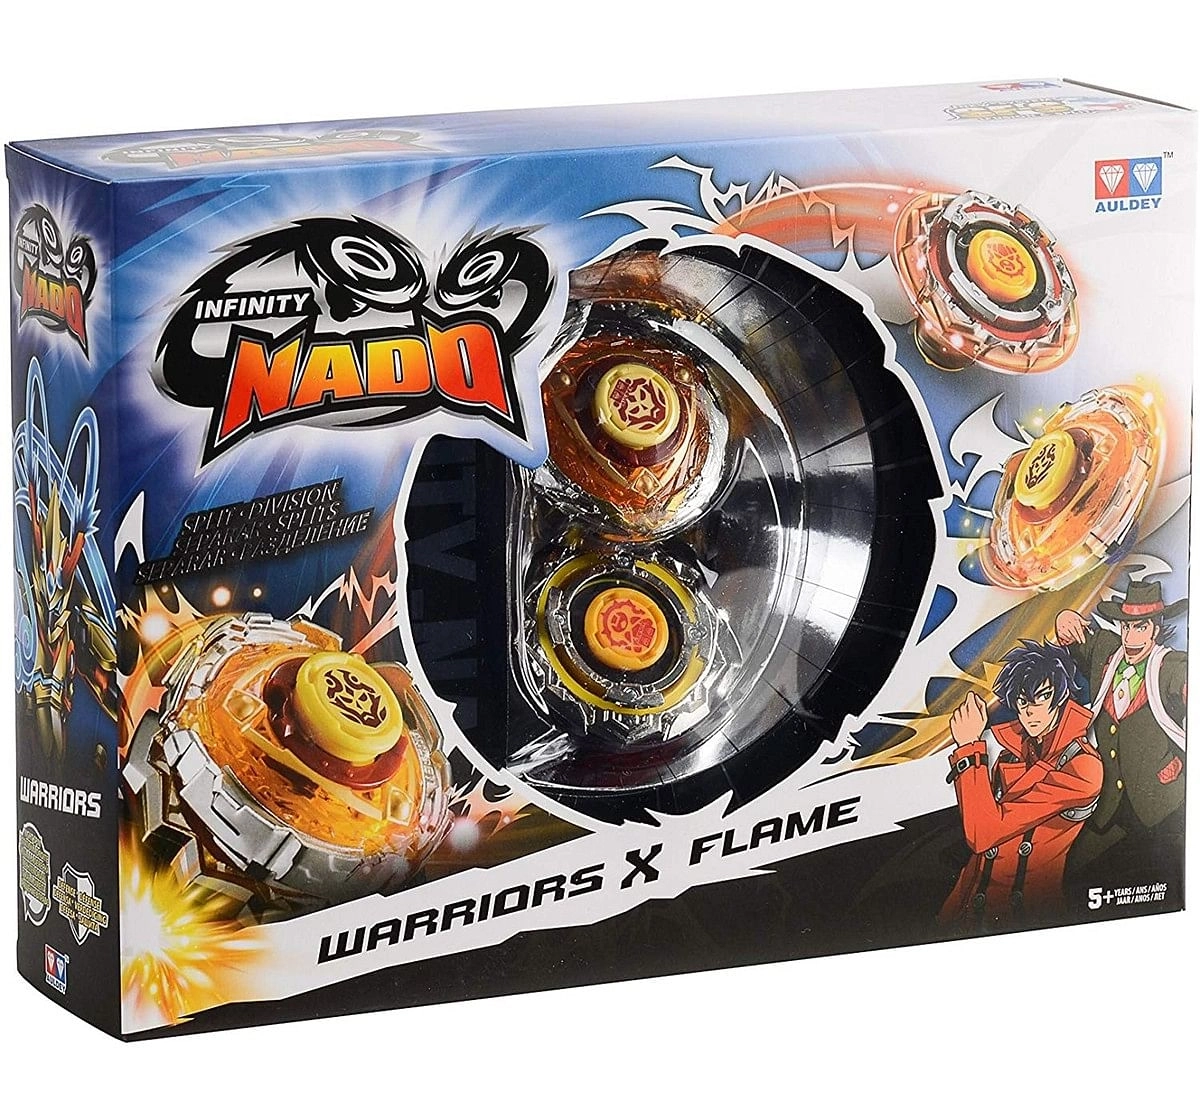 Infinity Nado Warriors X Flame, 12 Pieces Action Figure Play Sets for Kids age 5Y+ 